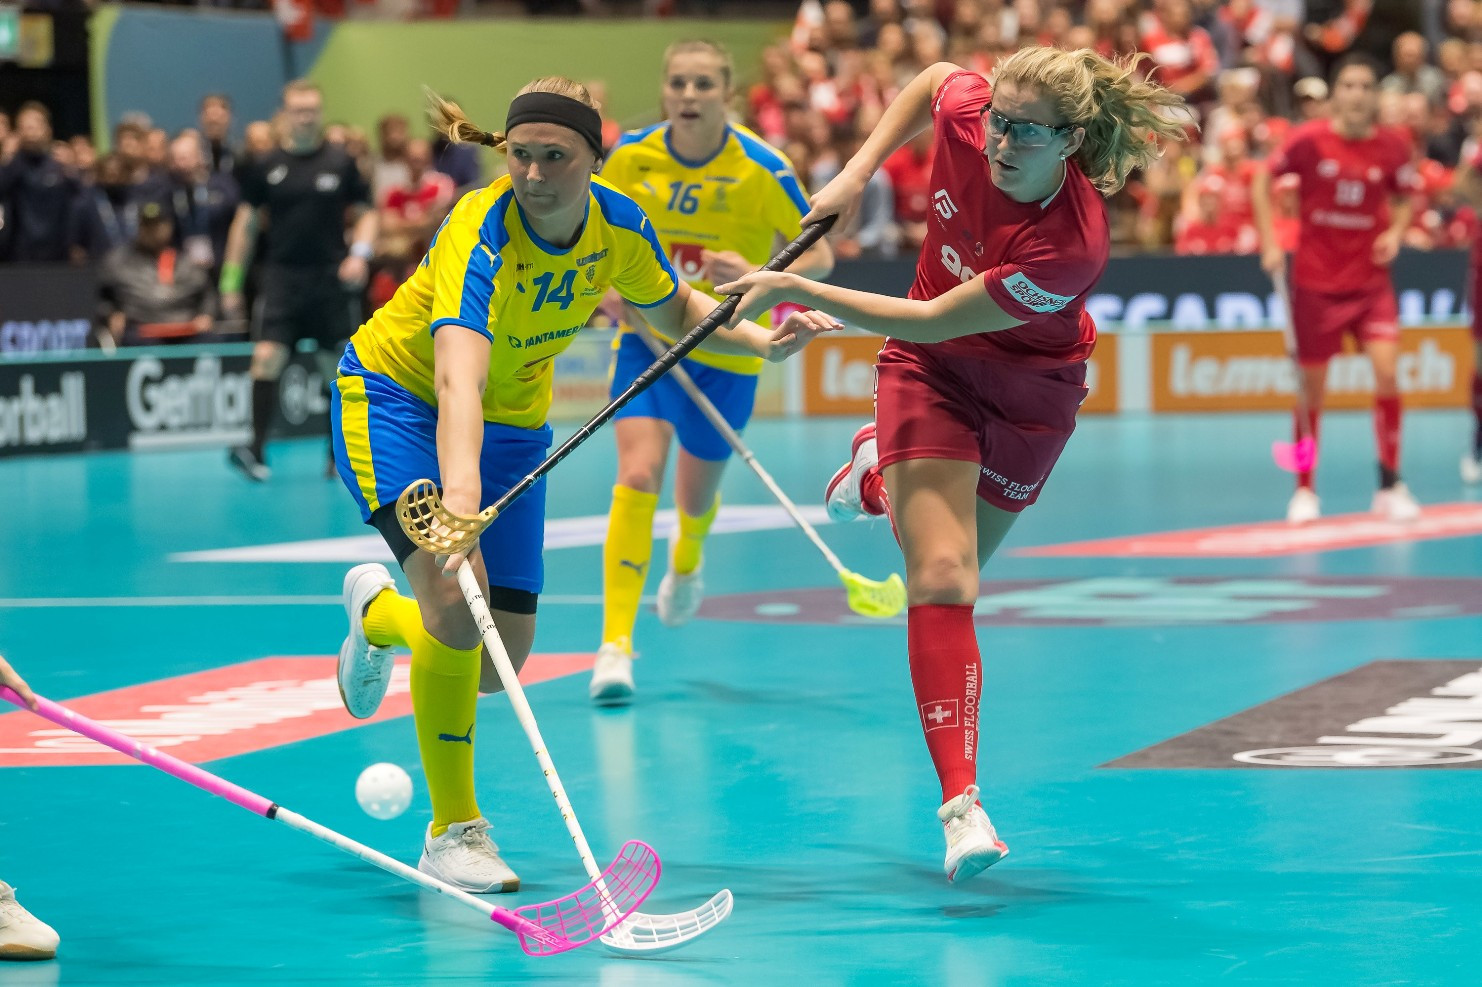 Women’s World Floorball Championship qualifiers rearranged due to COVID-19 pandemic